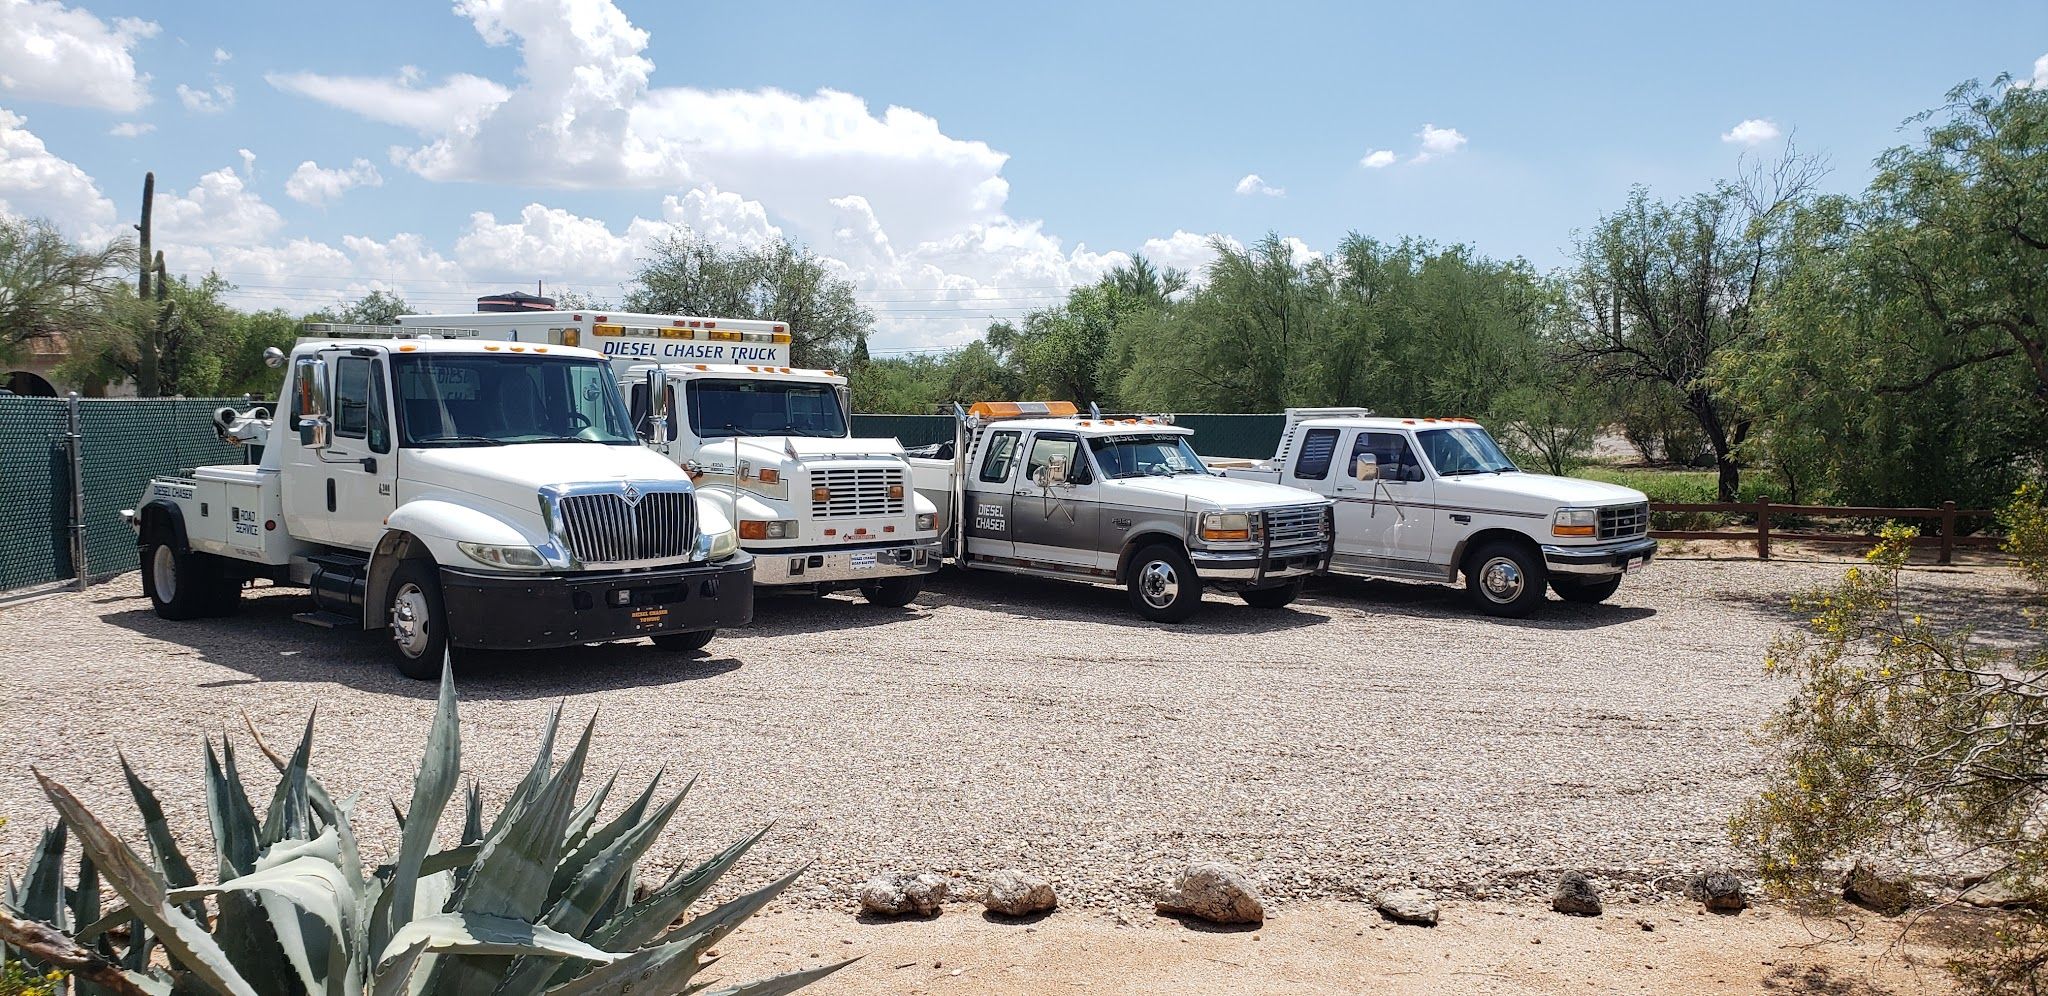 Services & Products Diesel Chaser Truck Service in Tucson AZ